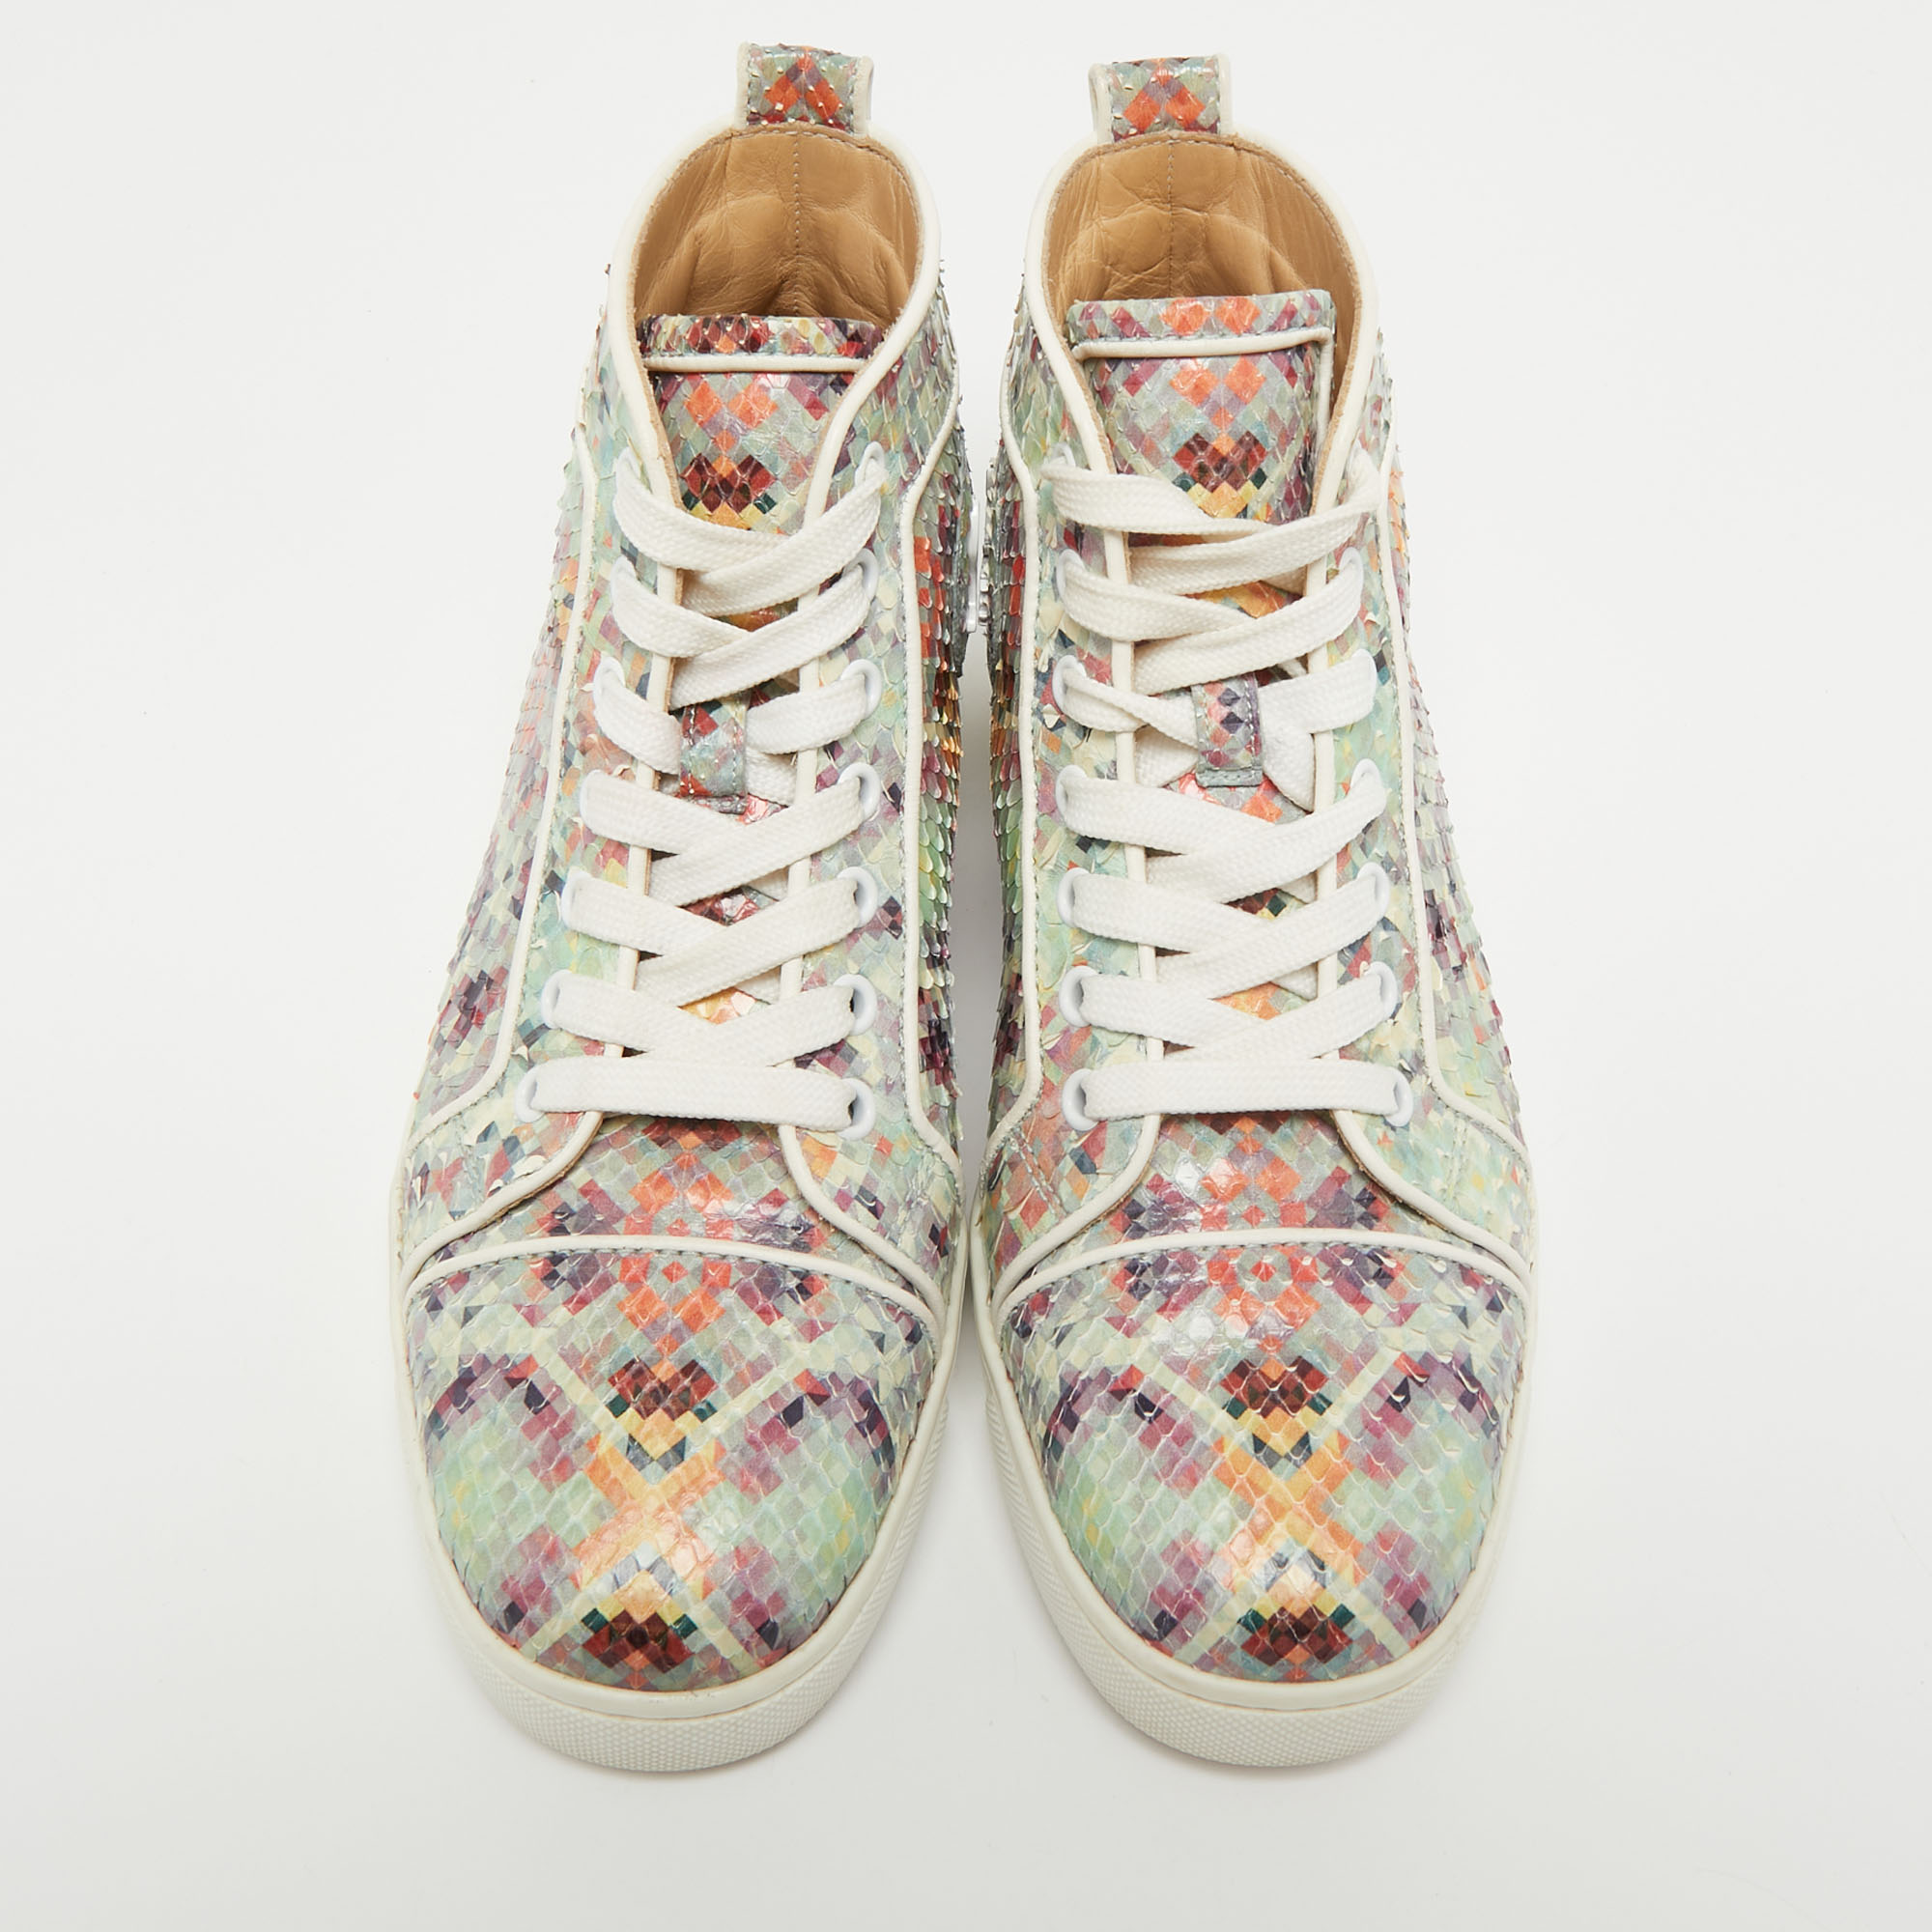 Christian Louboutin Multicolor Printed Python Louis Orlato High Top Sneakers Size 37